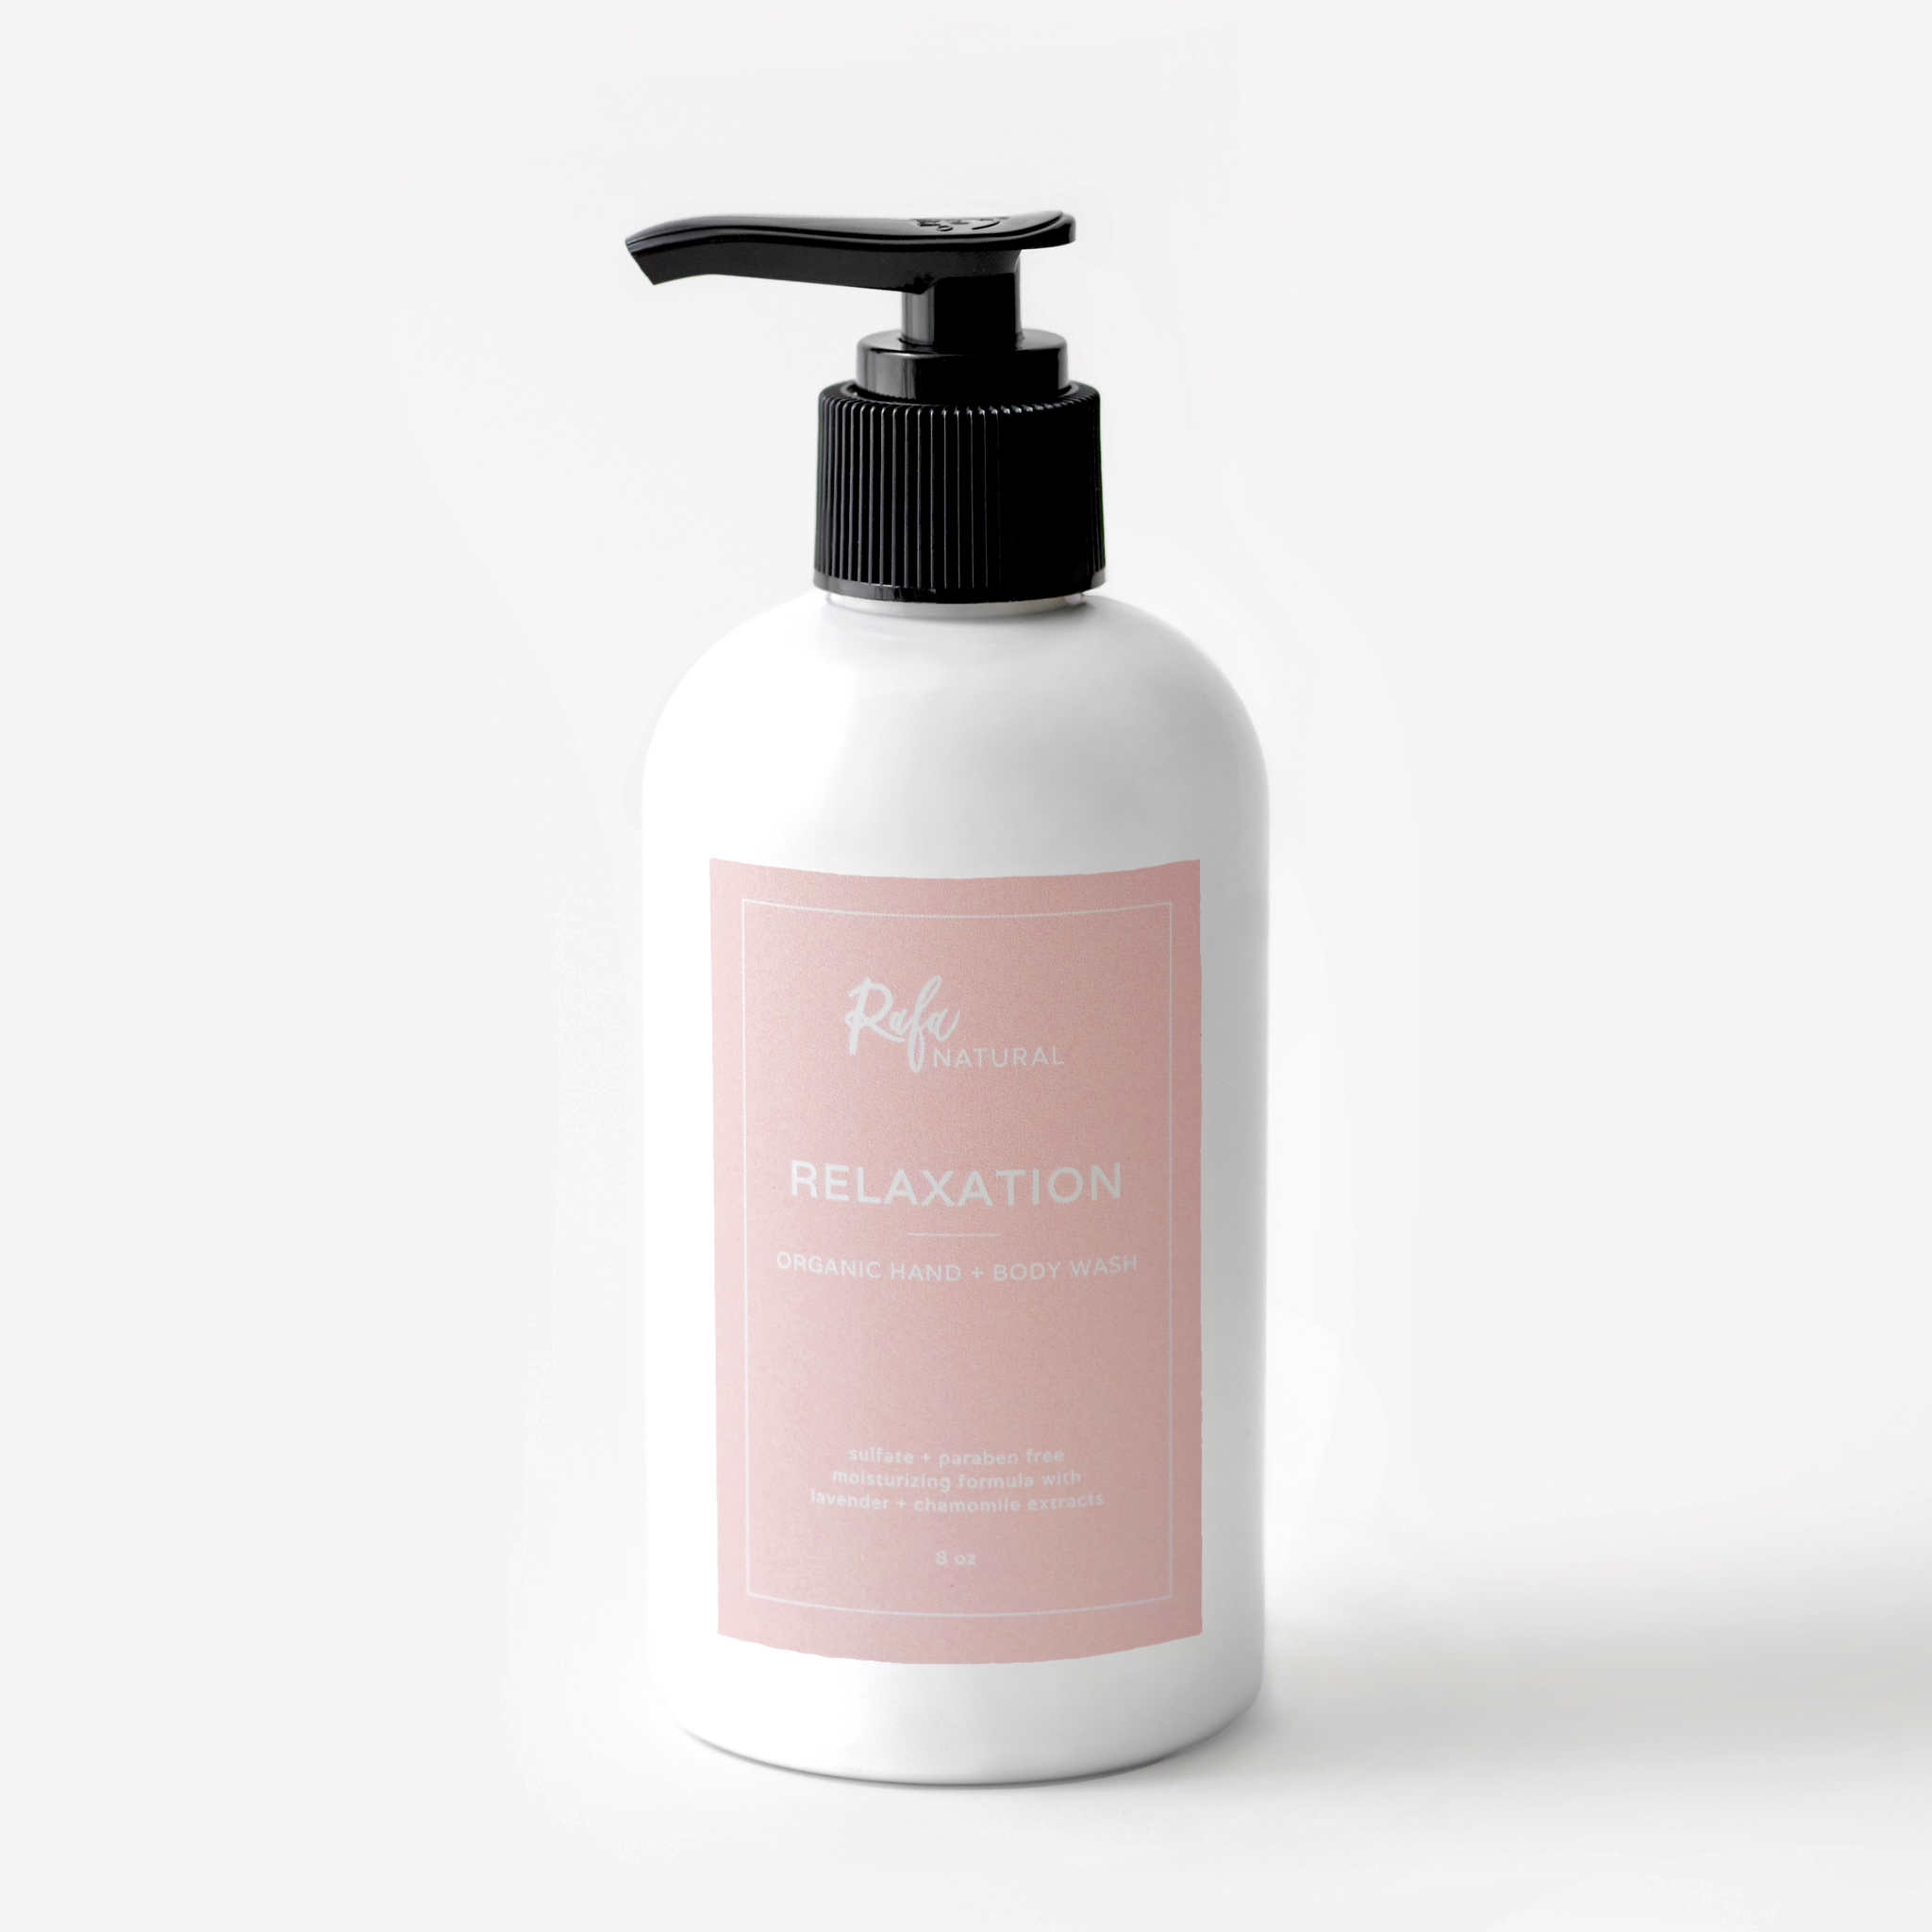 8oz. Relaxation Hand + Body Wash